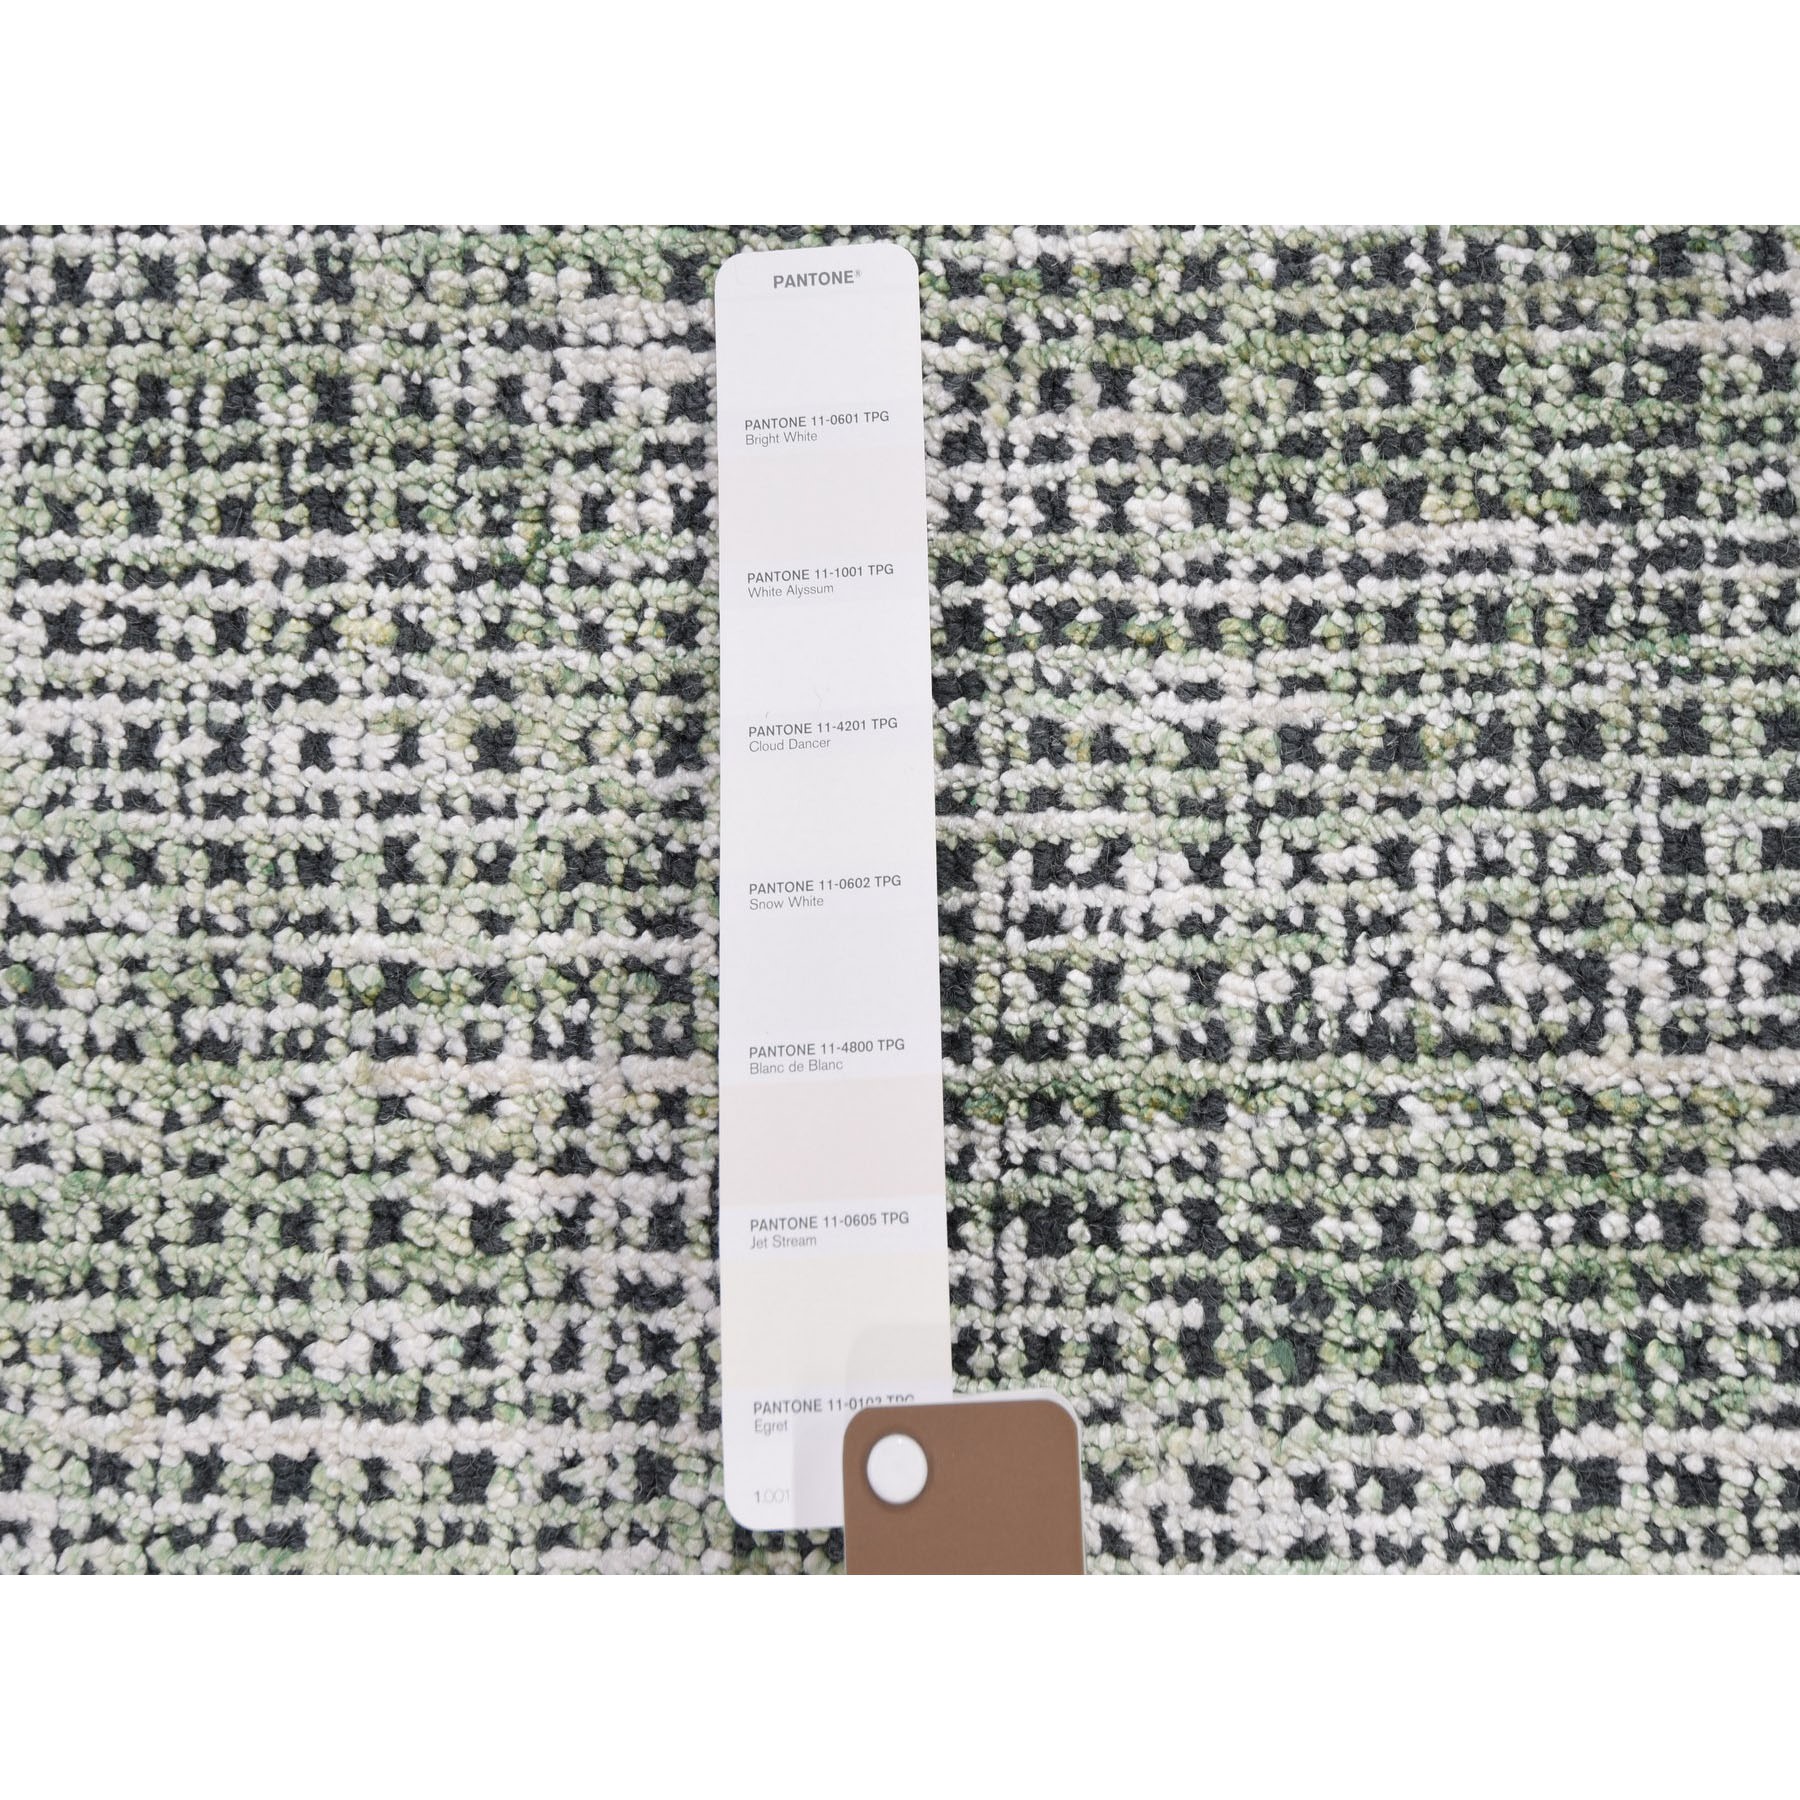 9-1 x12-1  Fence Design With Greens Wool And Art silk Tone On Tone Hand Loomed Oriental Rug 